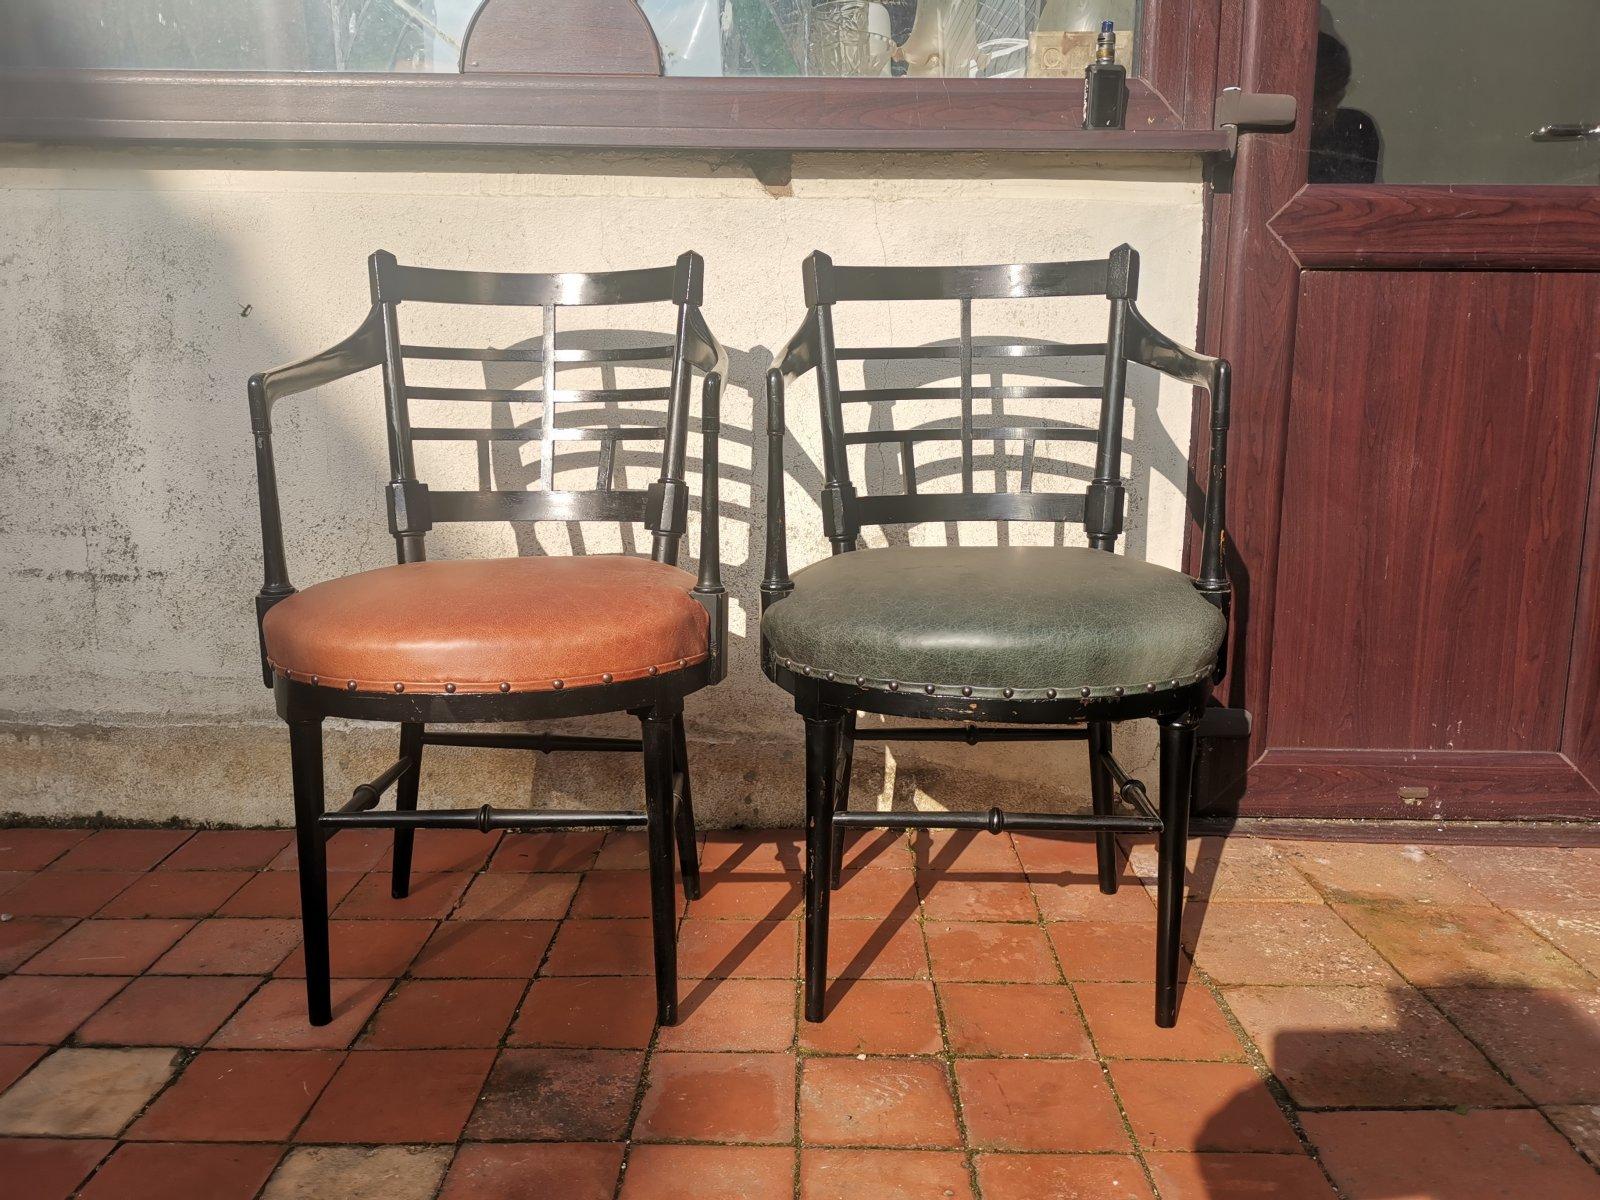 After a design by E W Godwin. Jacobean or Old English armchairs.
Two Aesthetic Movement Walnut ebonized armchairs both professionally reupholstered in a quality green and tan leather.
Probably made by Collier and Plunkett or James Peddle. See